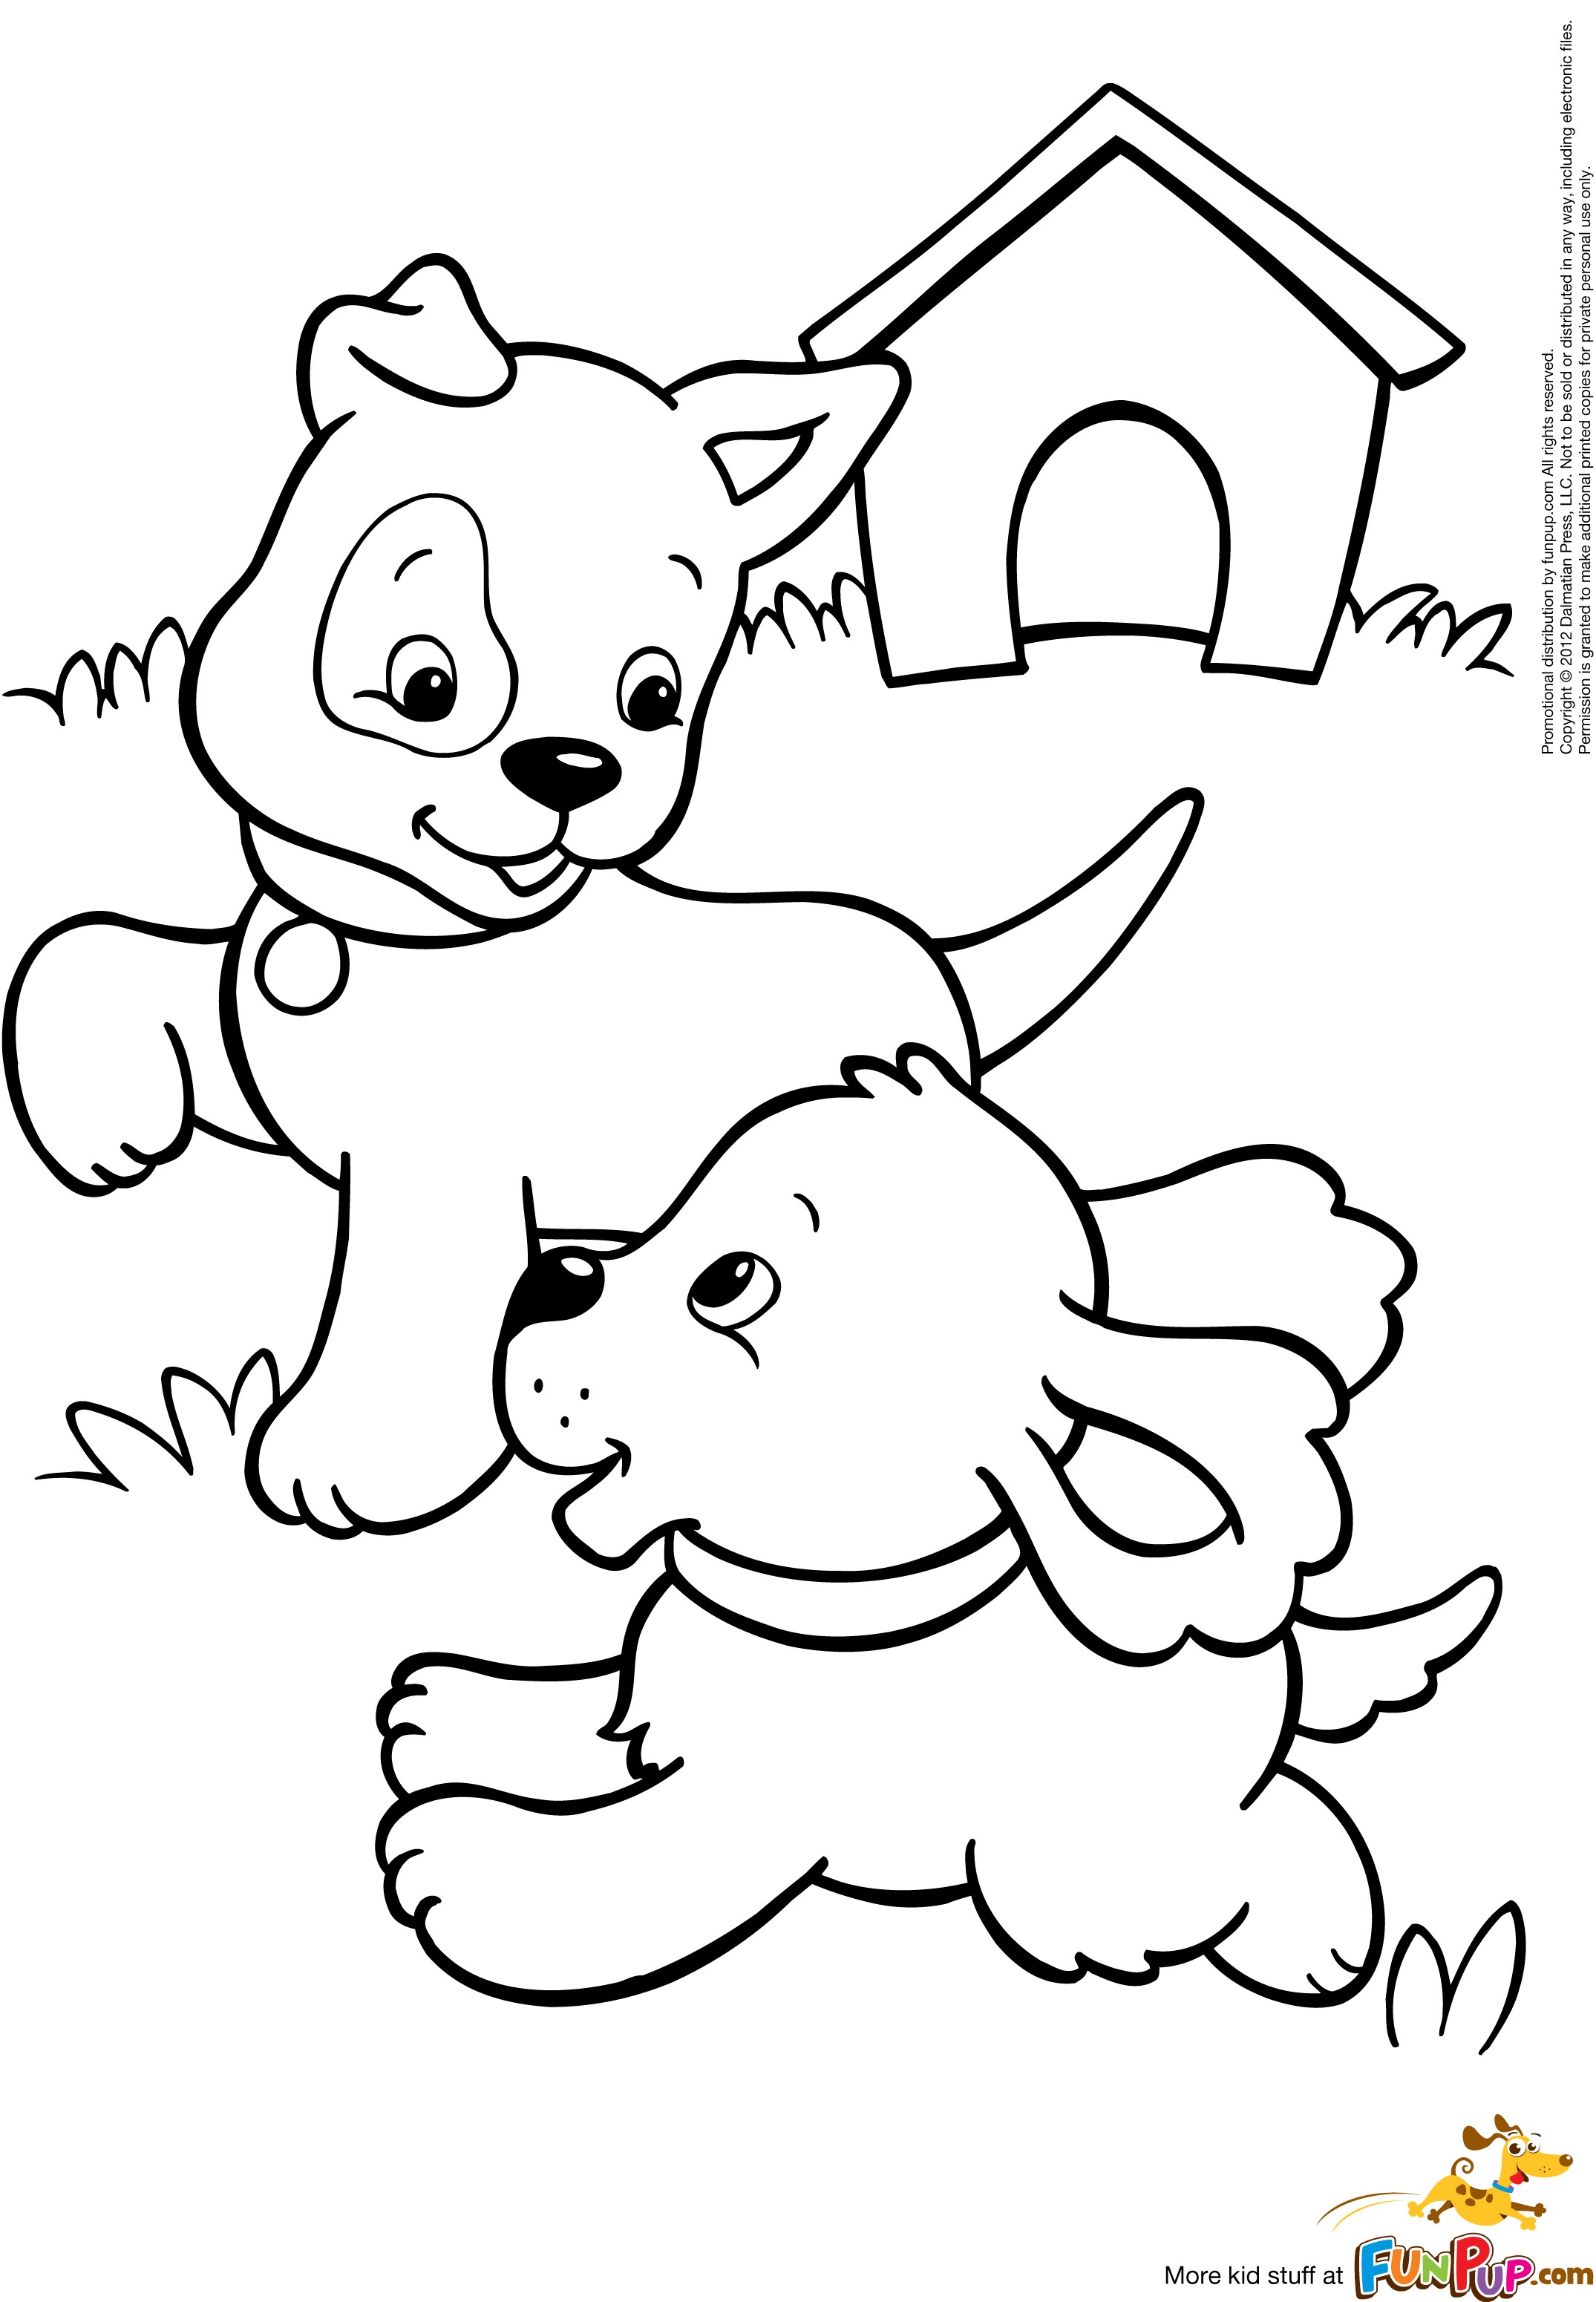 Cute Puppy Coloring Pages 12 Free Printable Cute Puppies Coloring